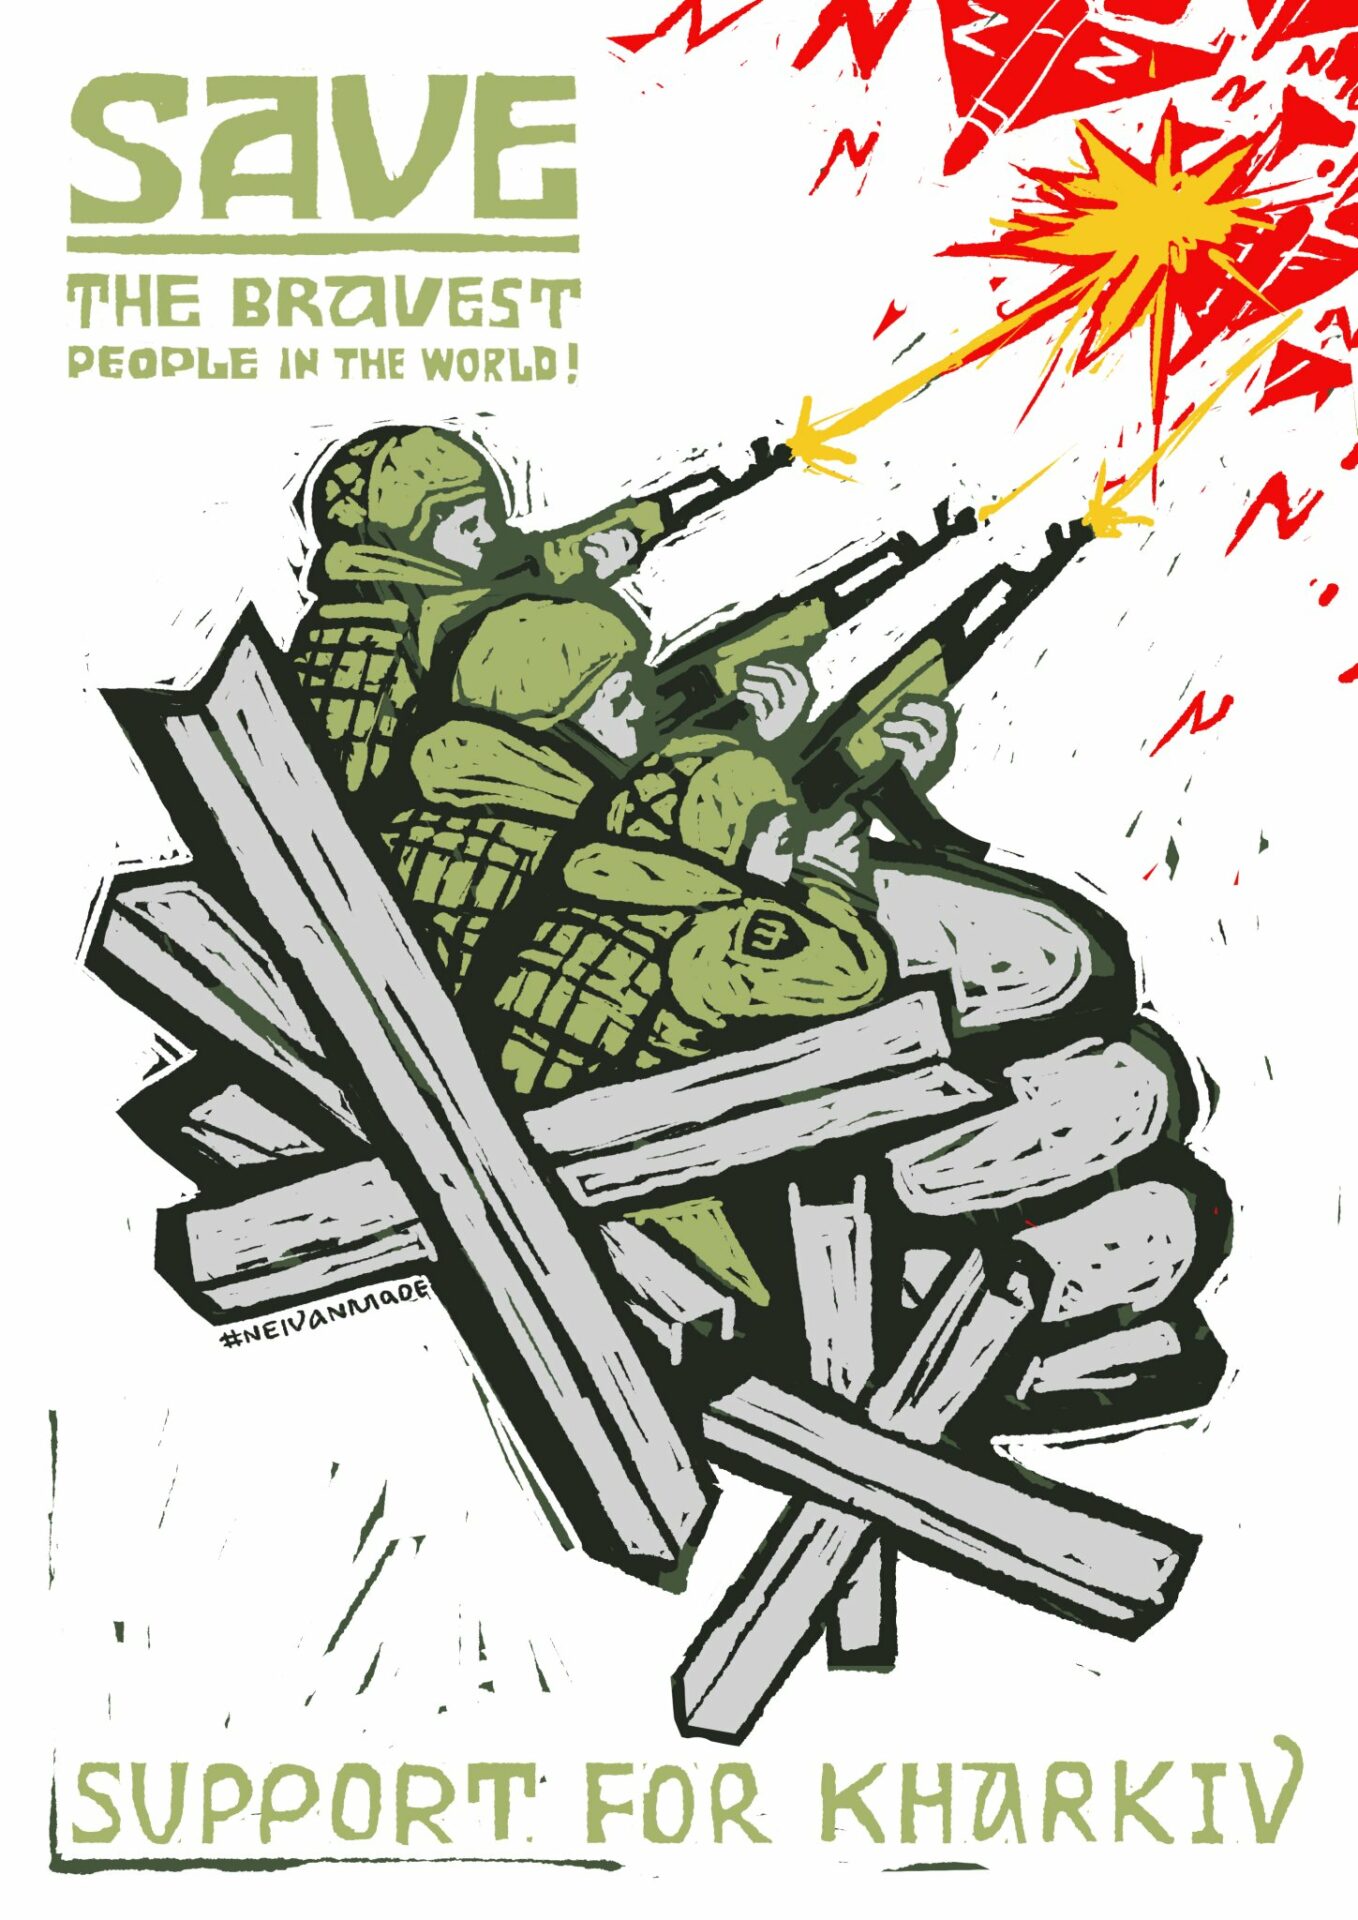 Painting by NEIVANMADE. It has a white background an in the center are Soldiers in green doing air defense by firing at incoming Russian missiles in the upper right. The missiles are red and yellow. In the upper left, written in green, is the text: "SAVE THE BRAVEST PEOPLE IN THE WORLD!" Below the Soldiers, also written in green, is "SUPPORT FOR KHARKIV"